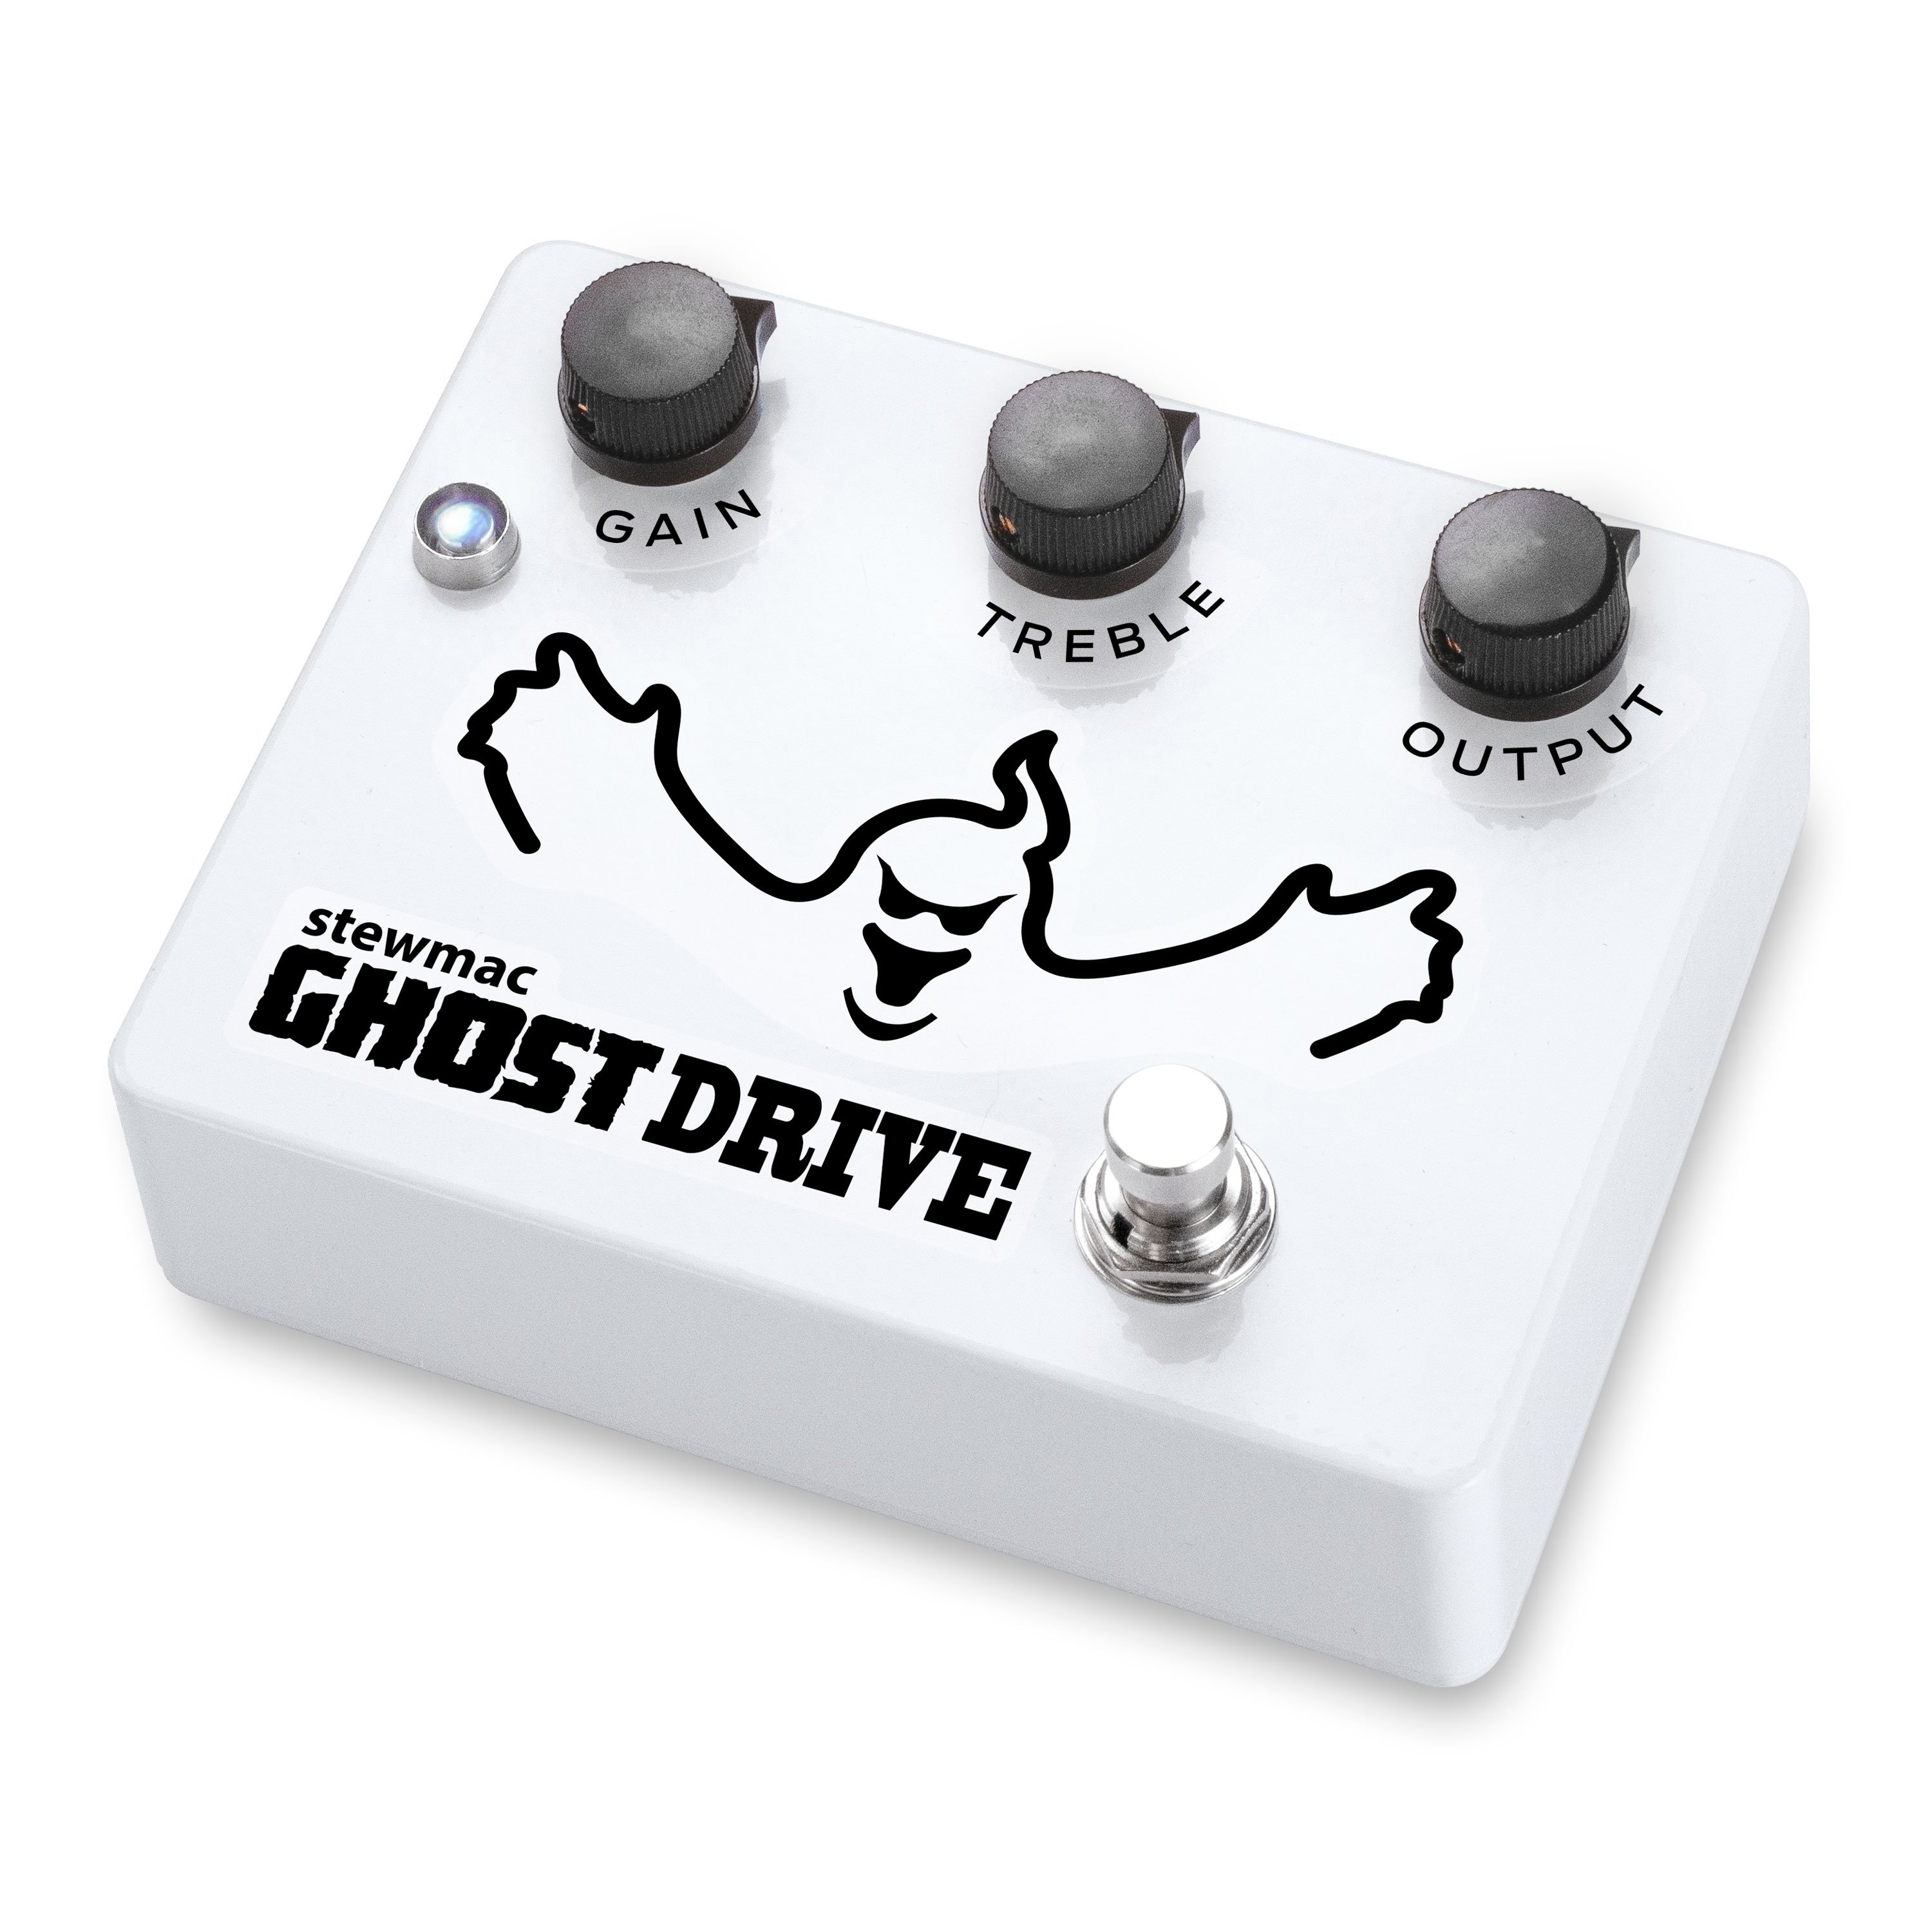 stewmac ghost drive review